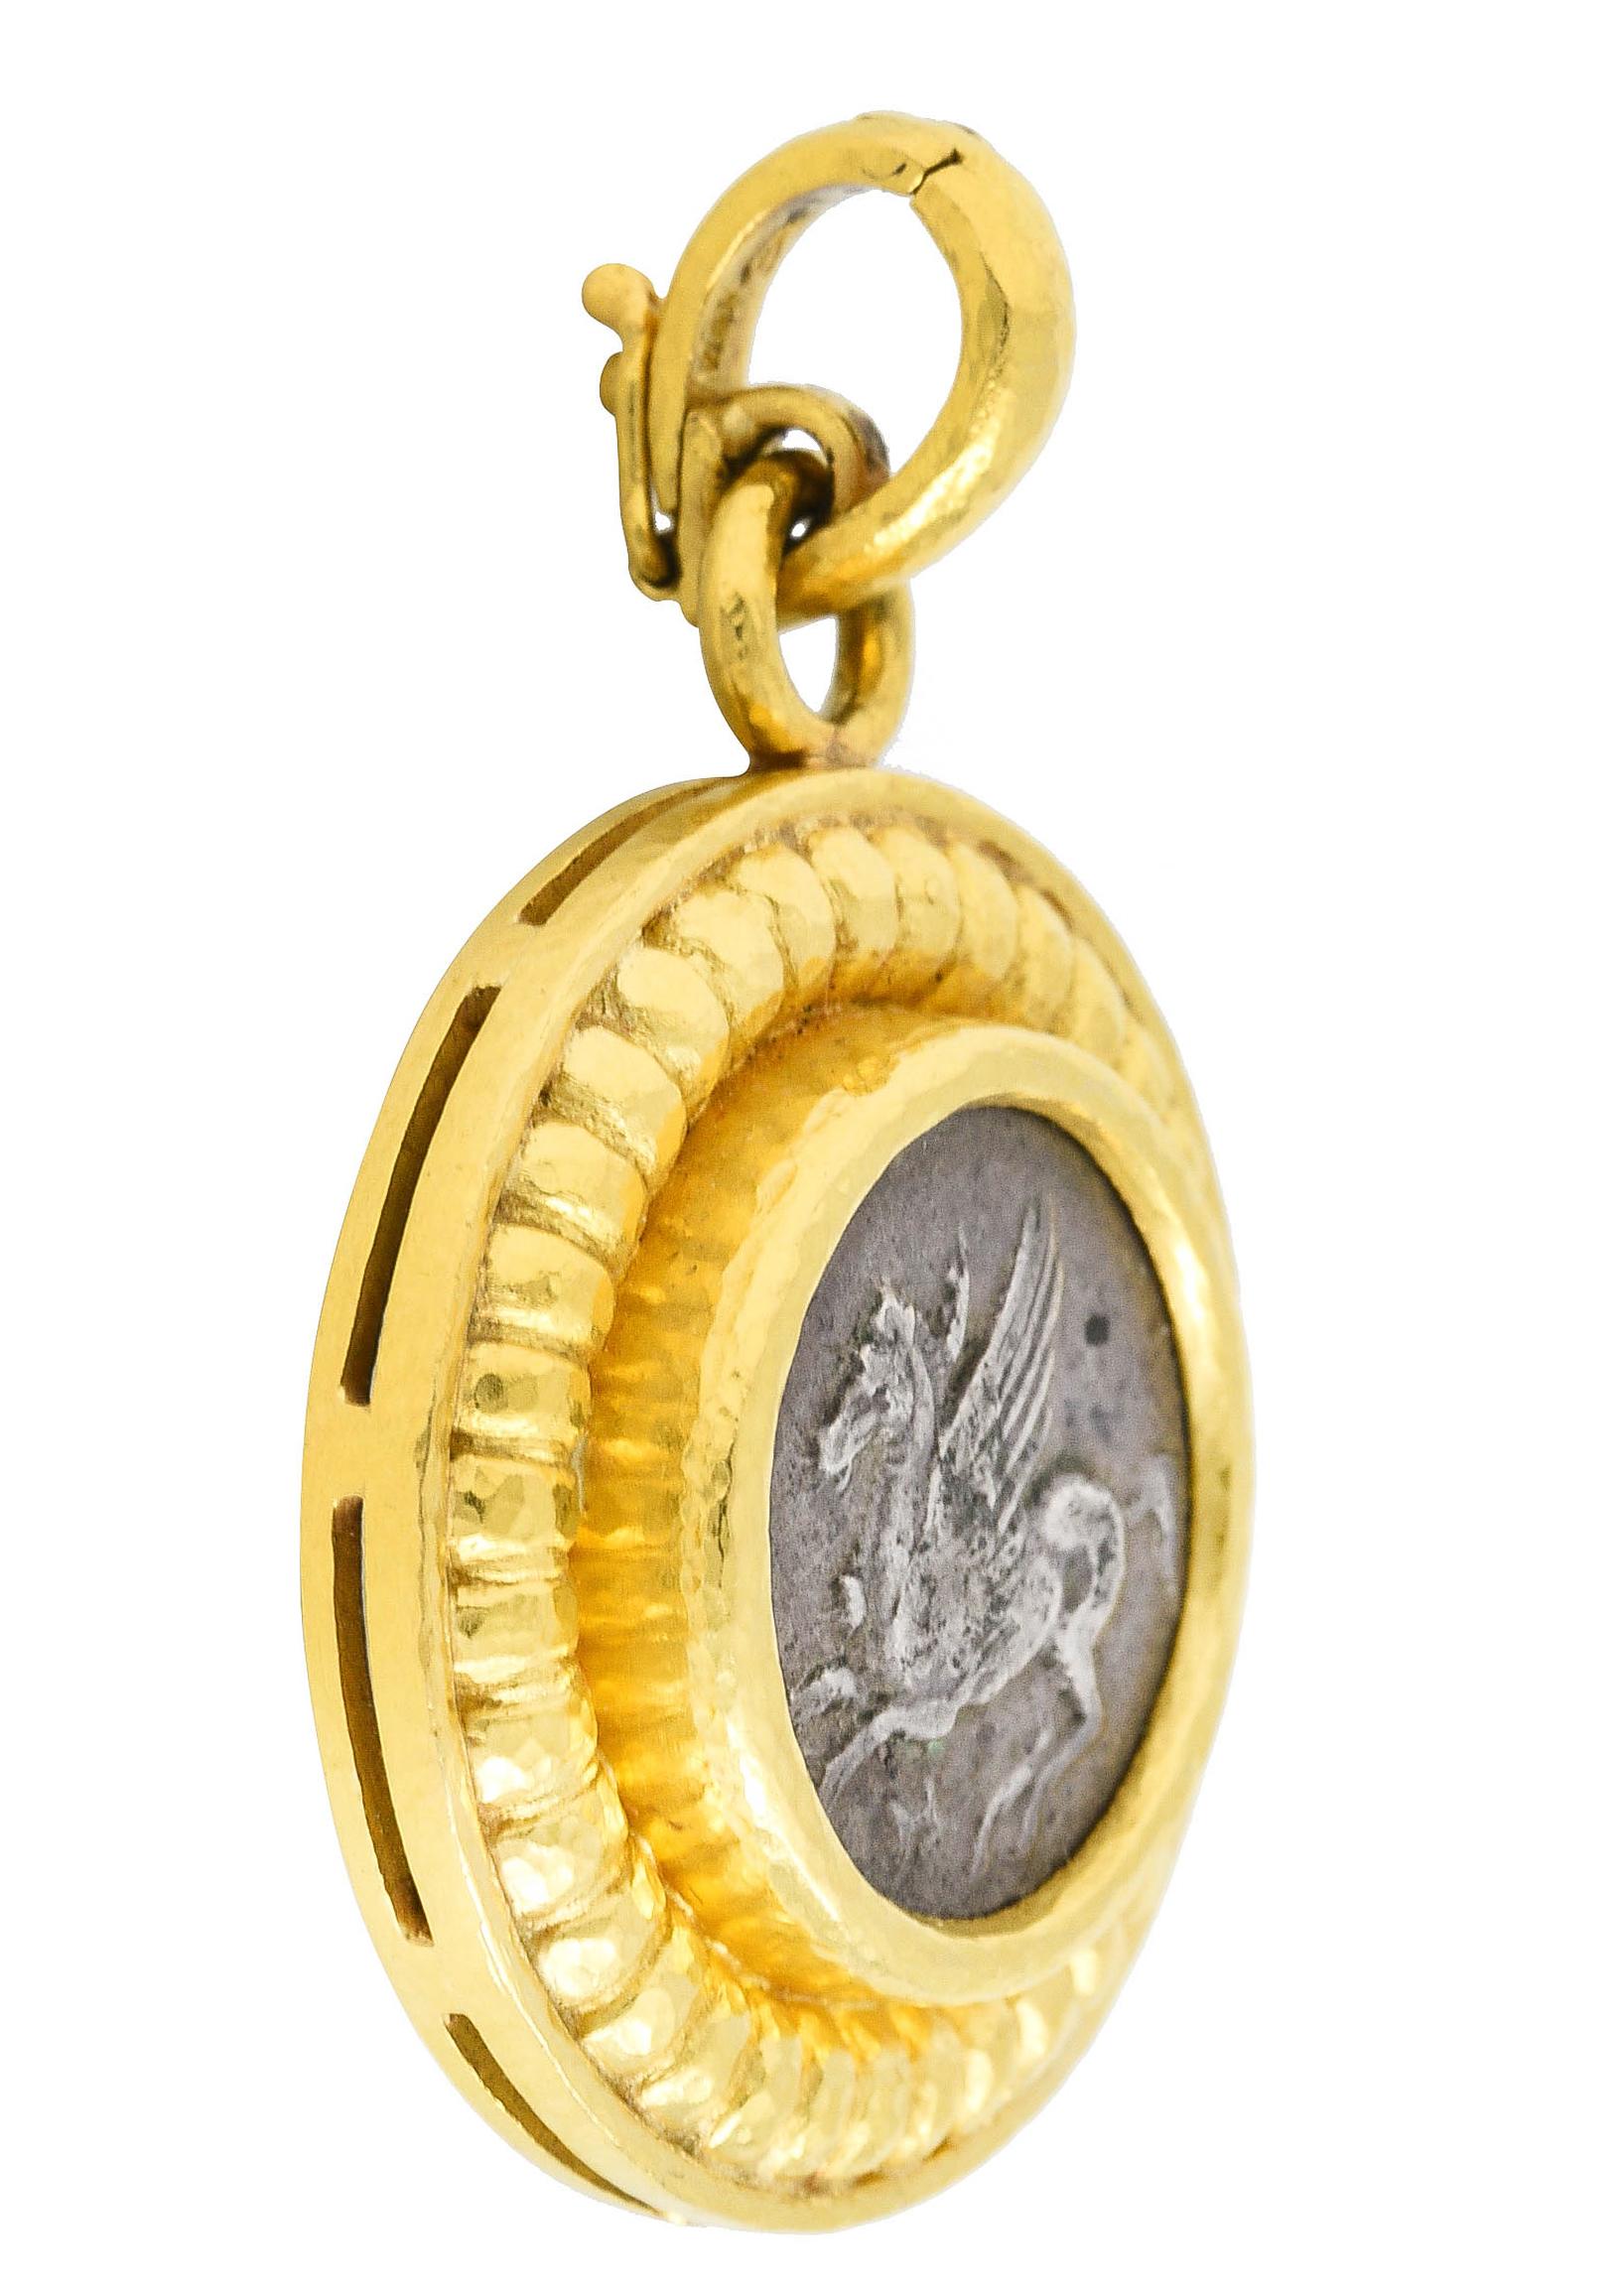 Pendant is designed as a round form centering an ancient style coin with a cameo of a pegasus

Reverse depicts a cameo of the Greek goddess Athena in profile wearing a helmet

Featuring a deeply grooved hammered gold frame surround

Completed by an